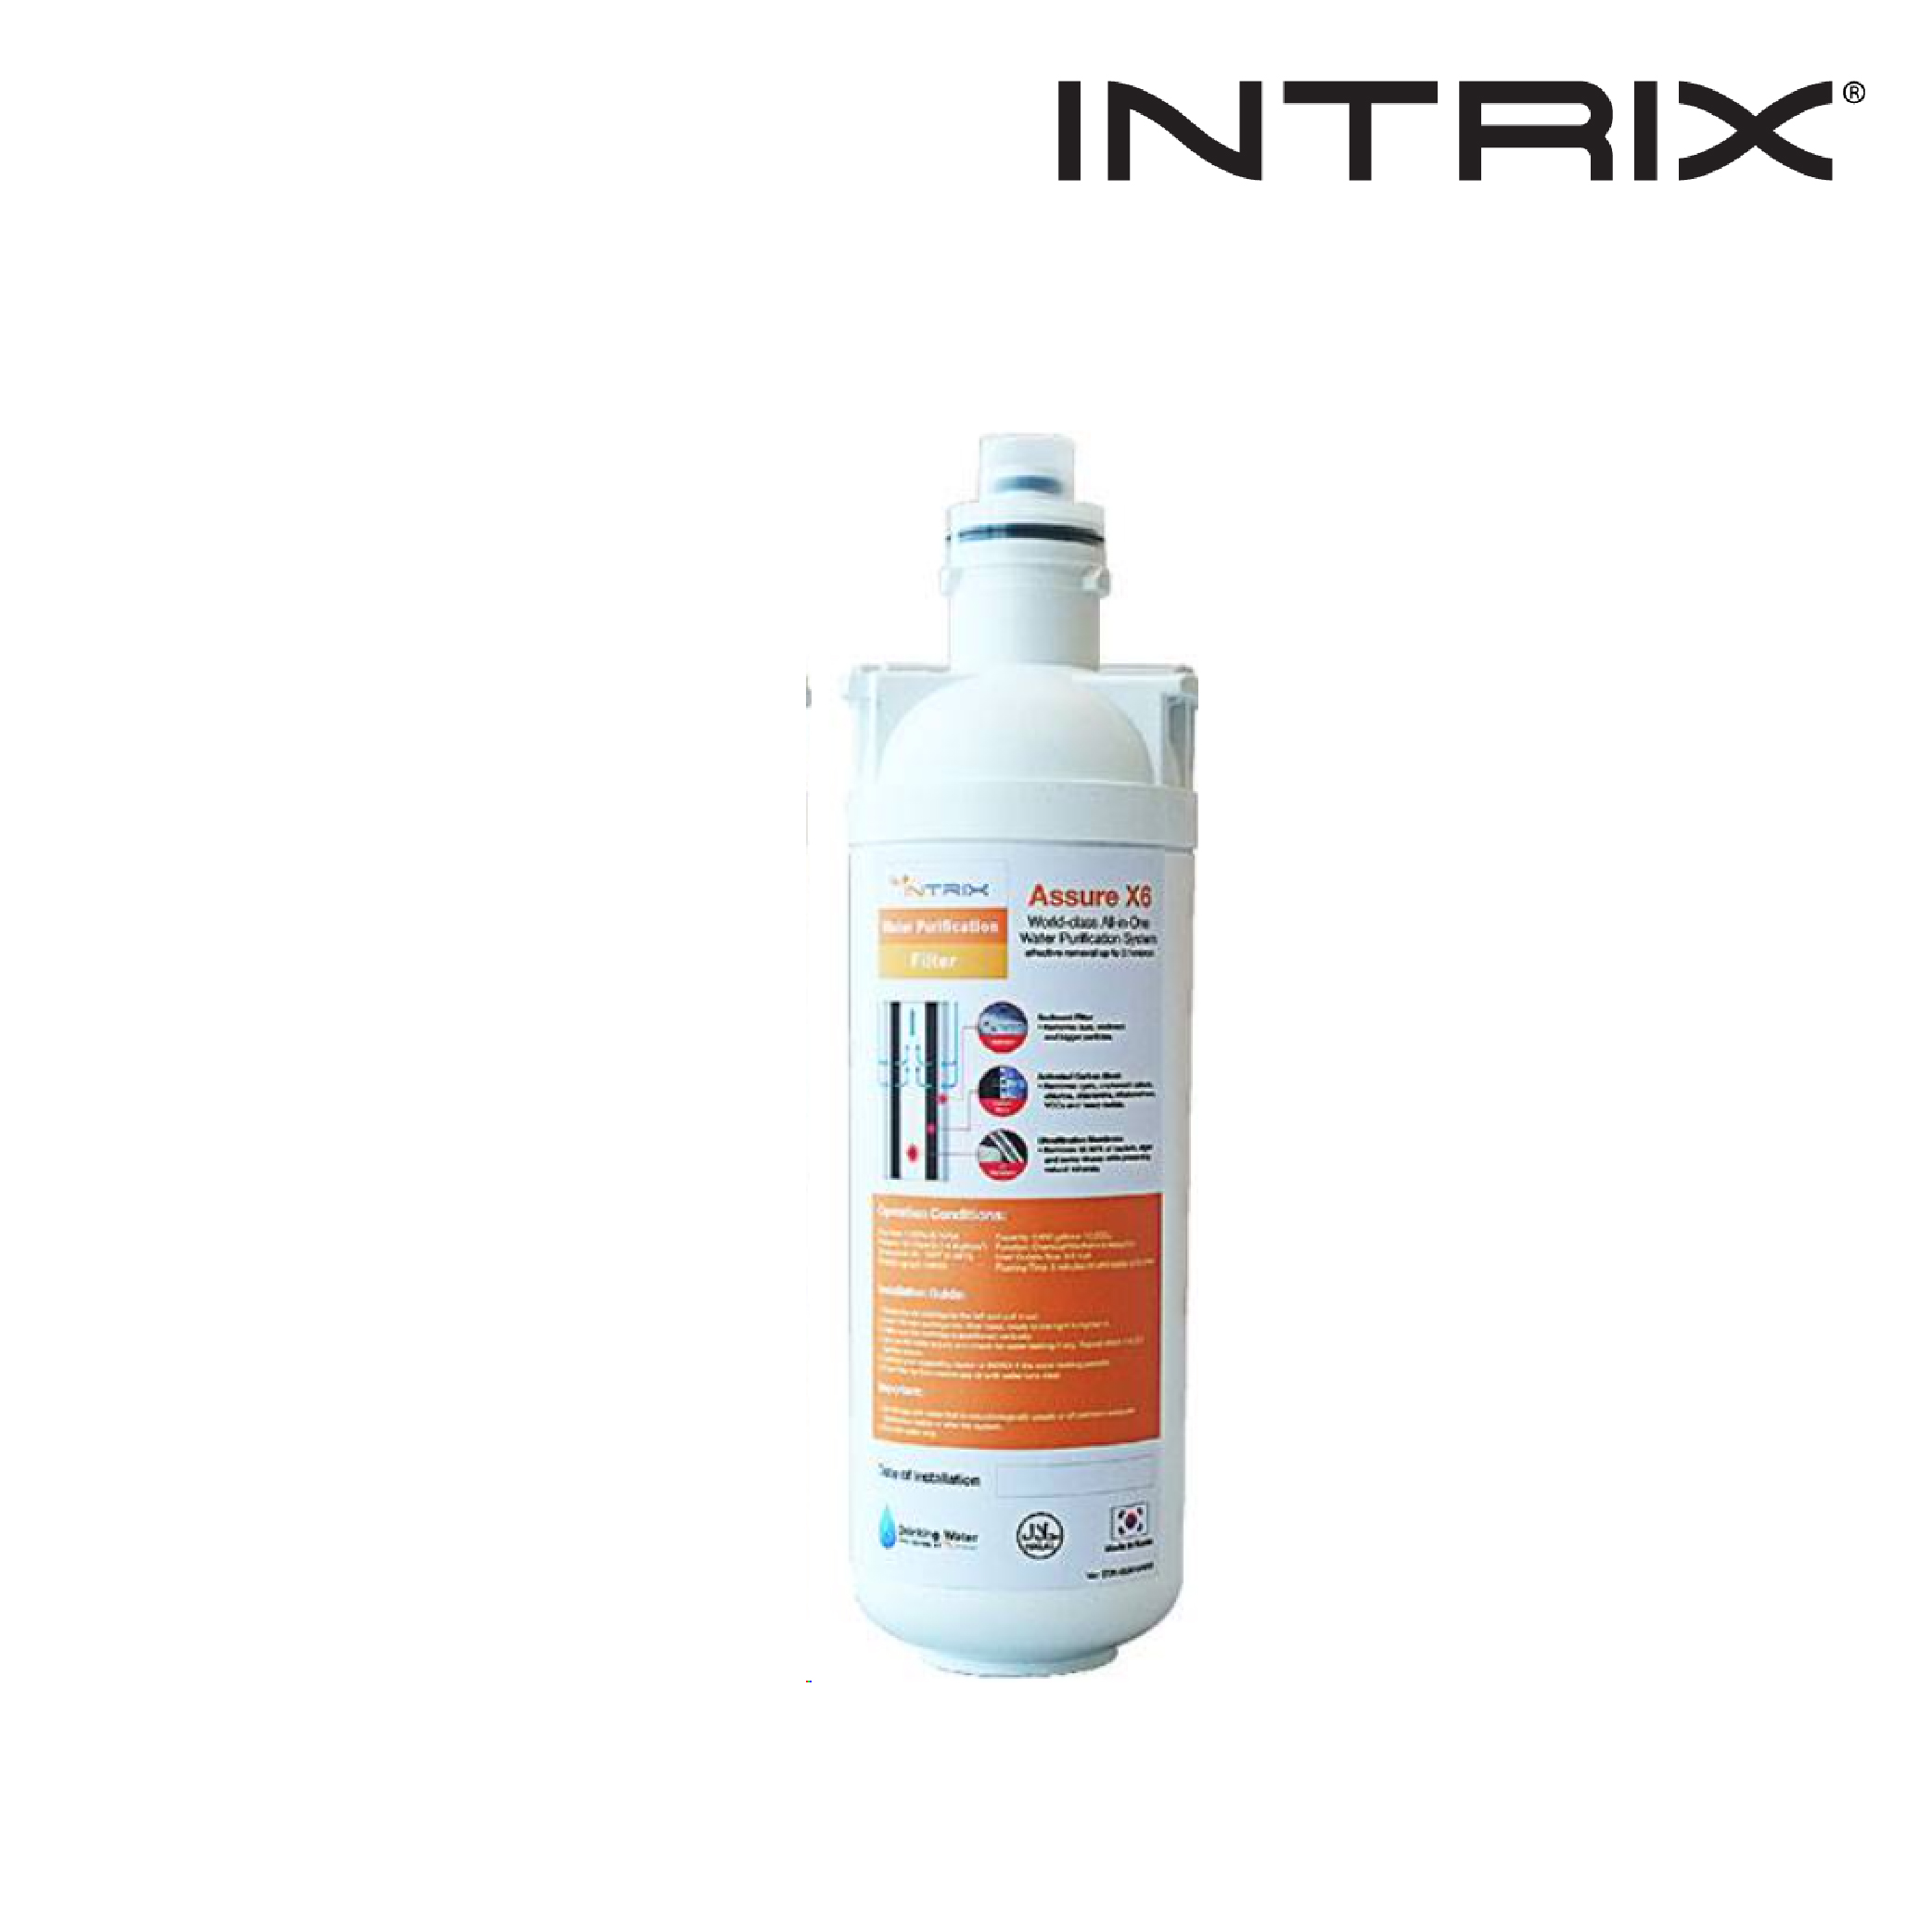 Intrix Assure X6 Filter Replacement - 10,000L or 1 Year Lifespan